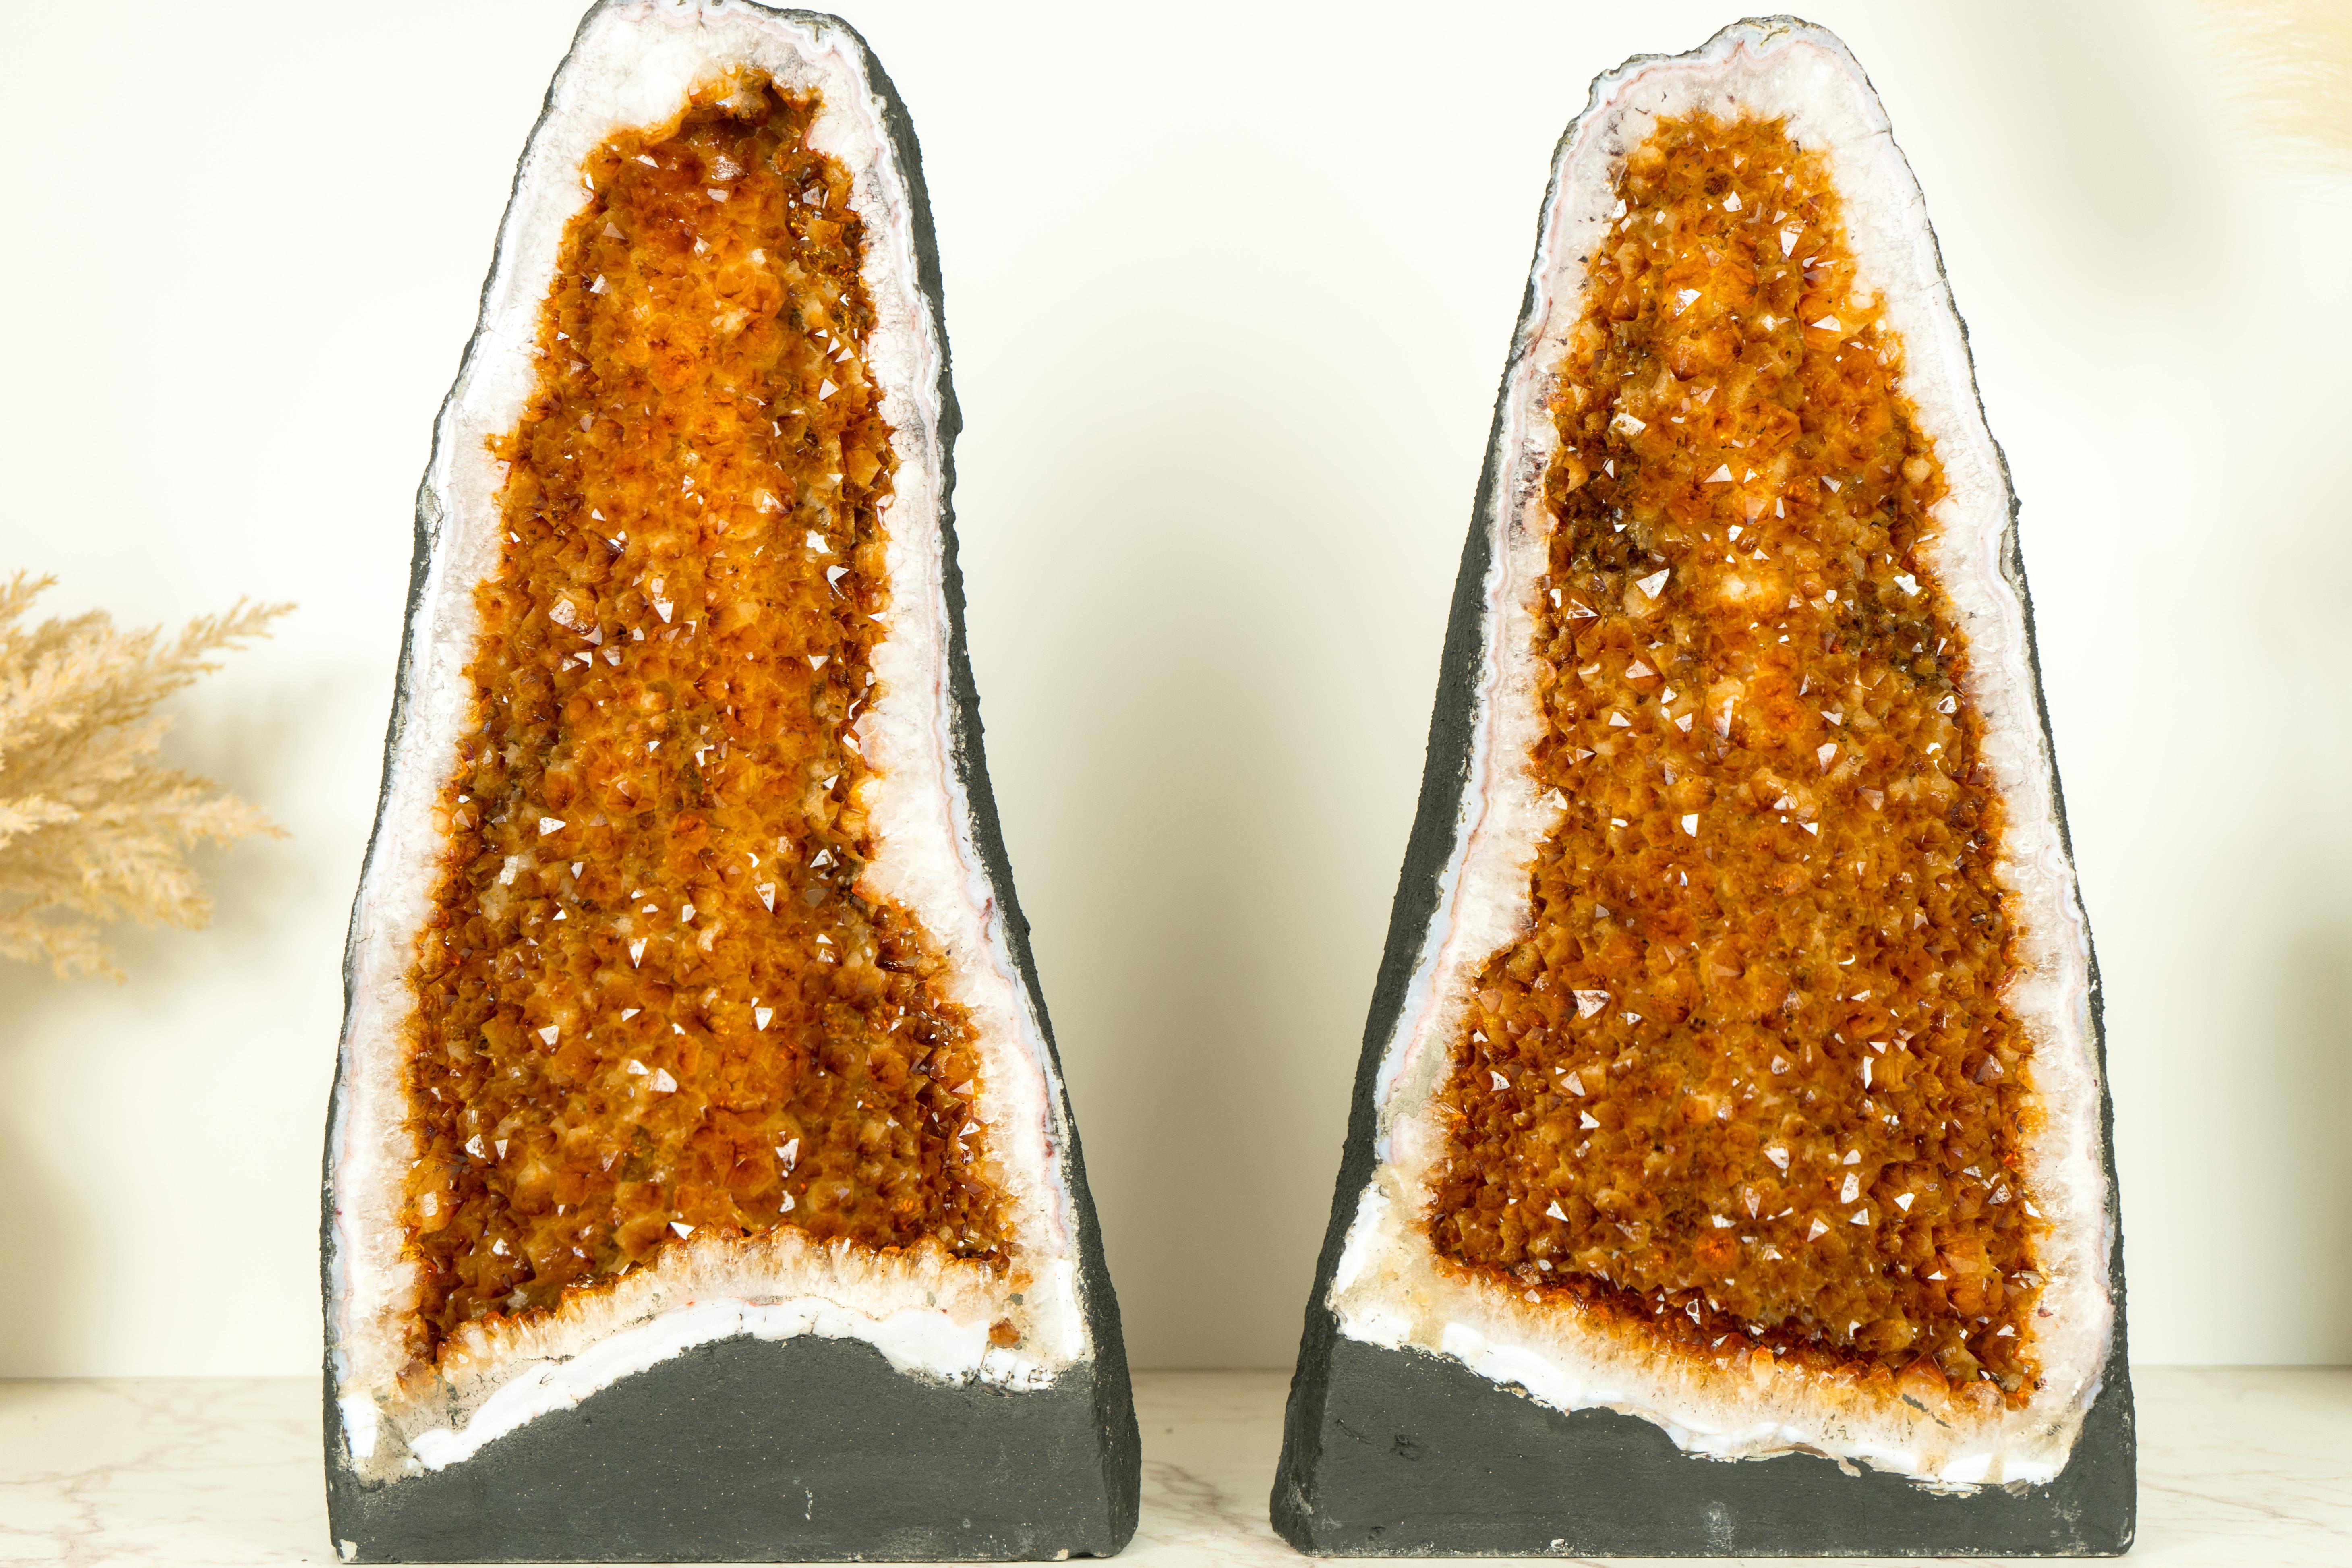 Pair of Citrine Geode Cathedrals with Sparkling AAA-Grade, Rich Orange Druzy 4